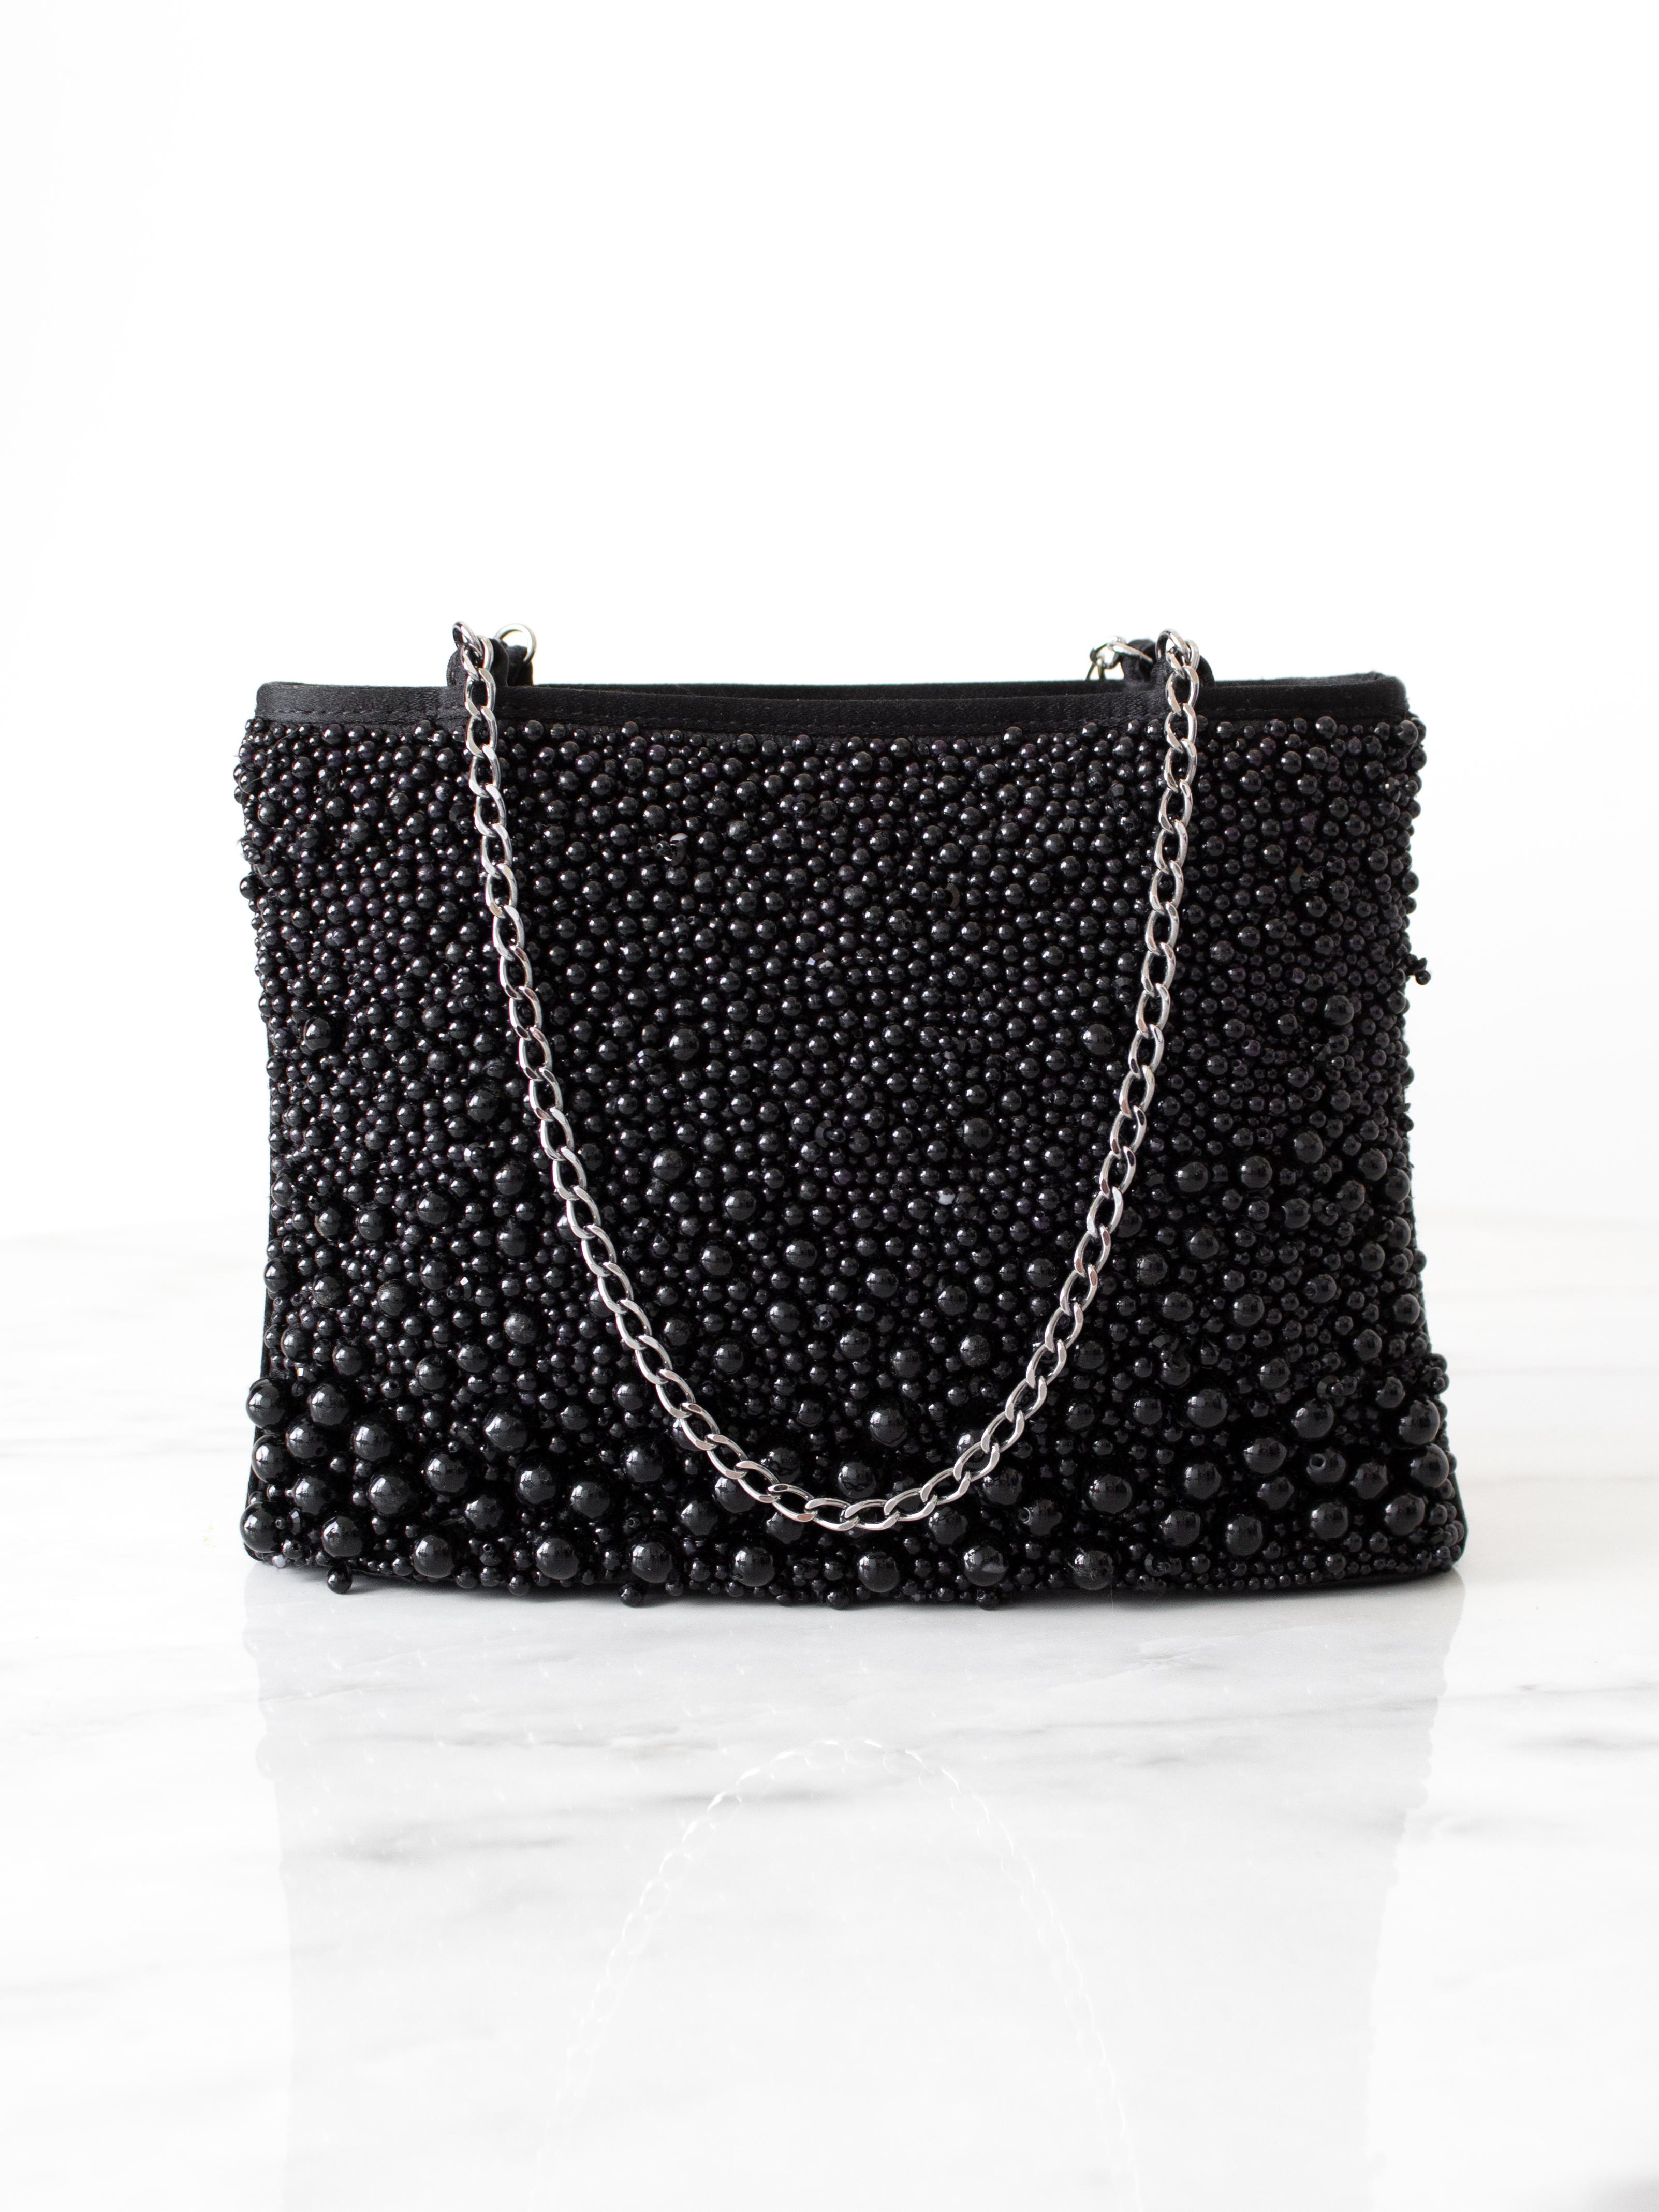 Introducing the chic evening bag from Chanel's Spring-Summer 2001 Act I collection. Crafted from luxurious silk and adorned with ruthenium chain straps, the bag features the iconic CC logo and delicate imitation pearls reminiscent of black caviar.